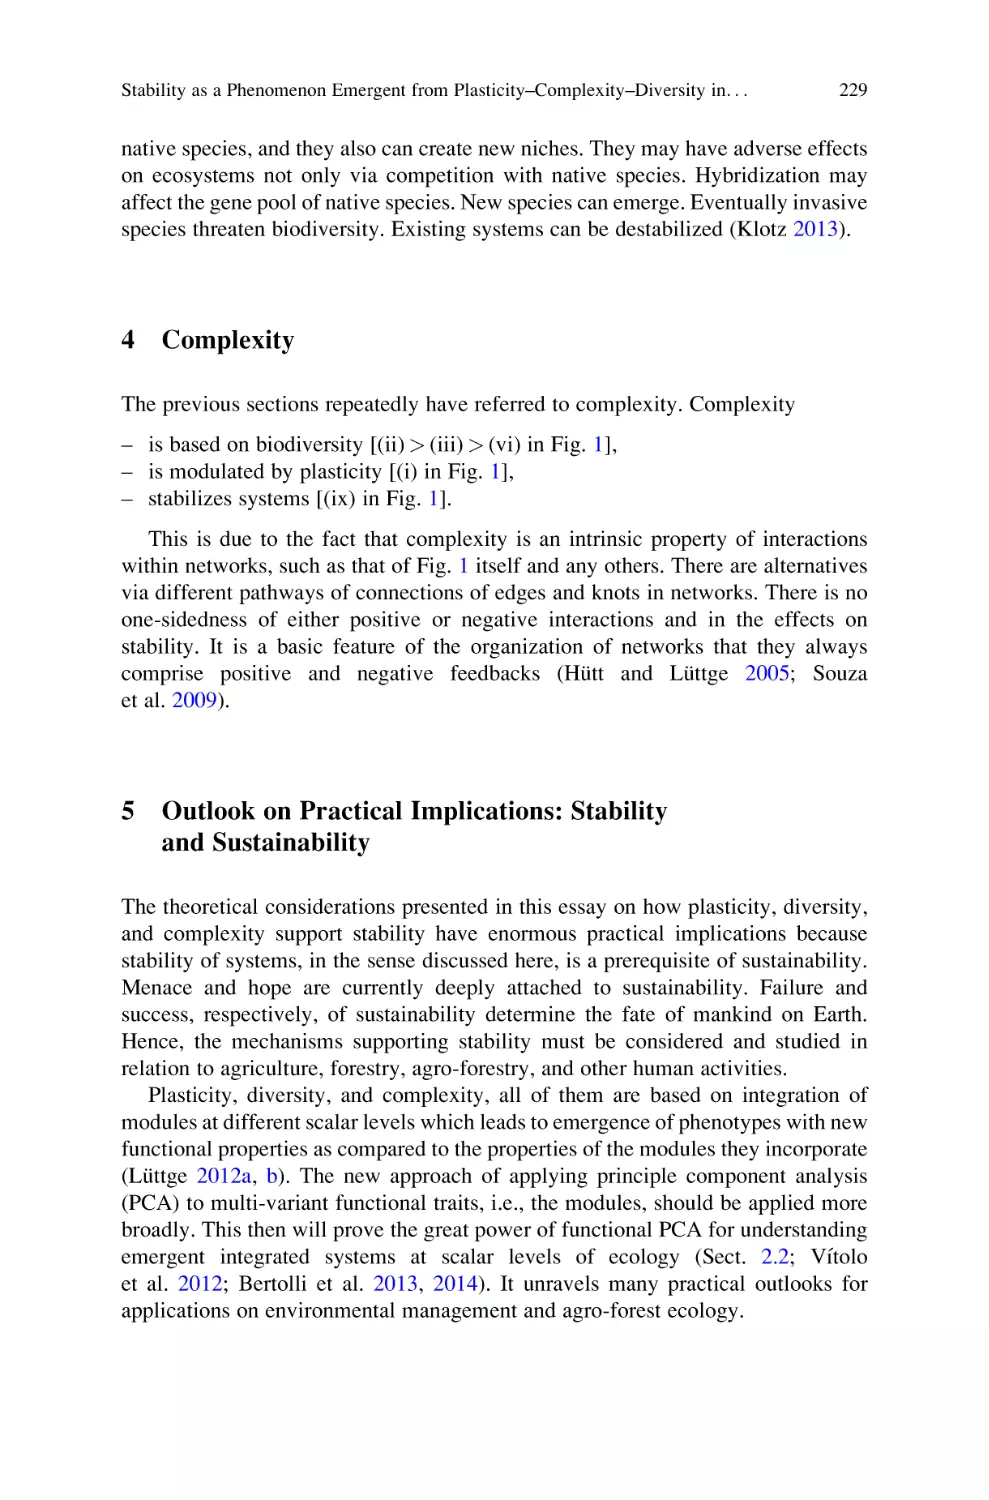 4 Complexity
5 Outlook on Practical Implications